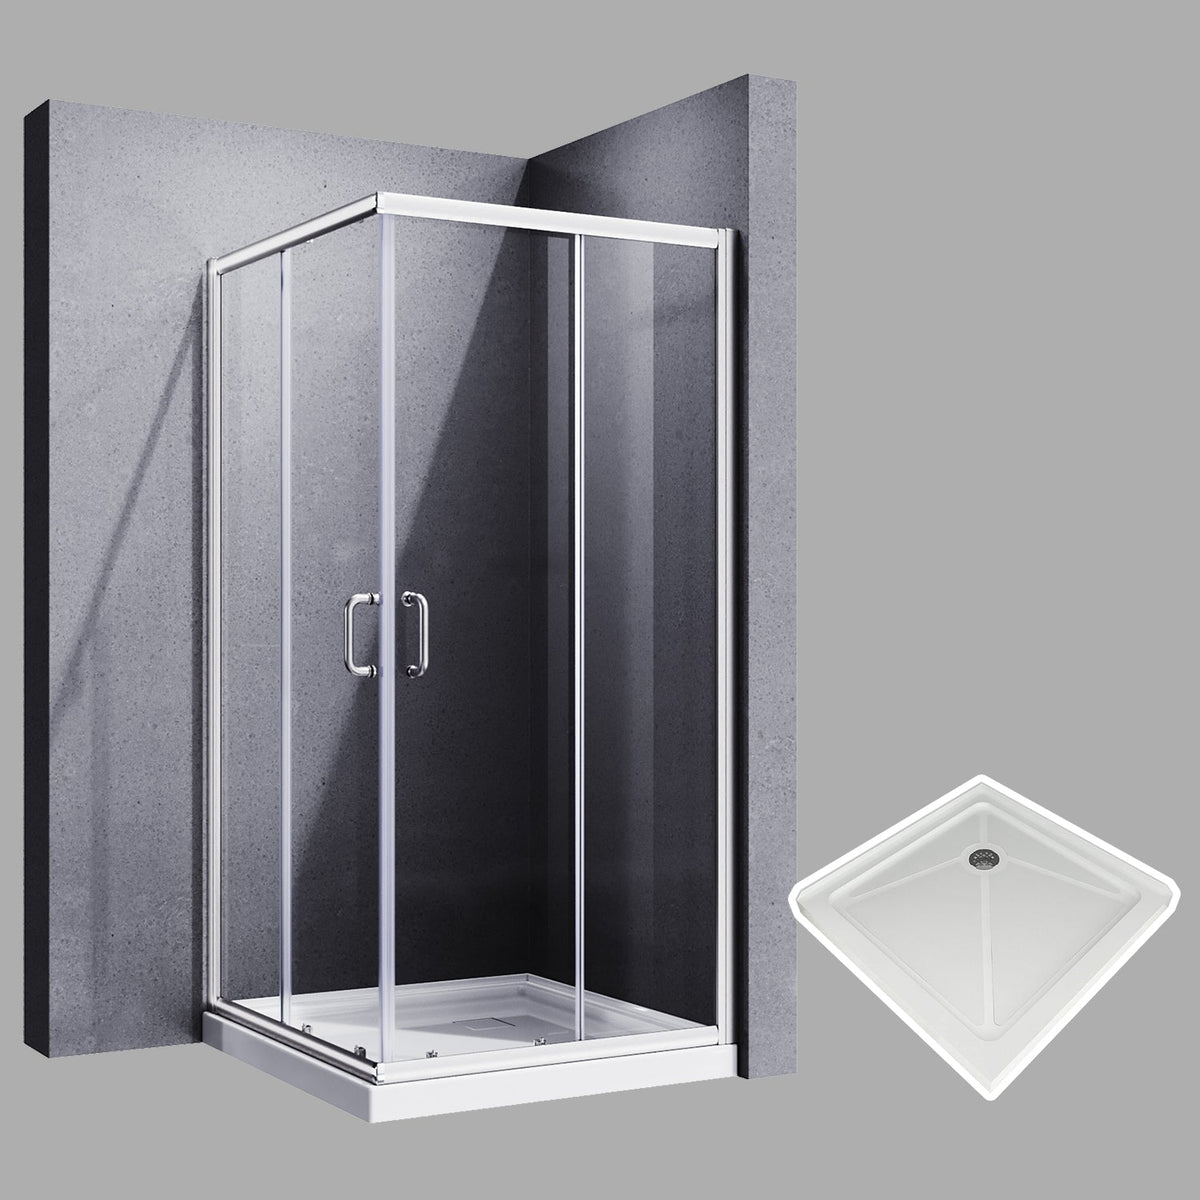 SUNNY SHOWER 34 in. W x 34 in. D x 72 in. H Chrome Finish Corner Entry Enclosure With Sliding Doors And White Square Base